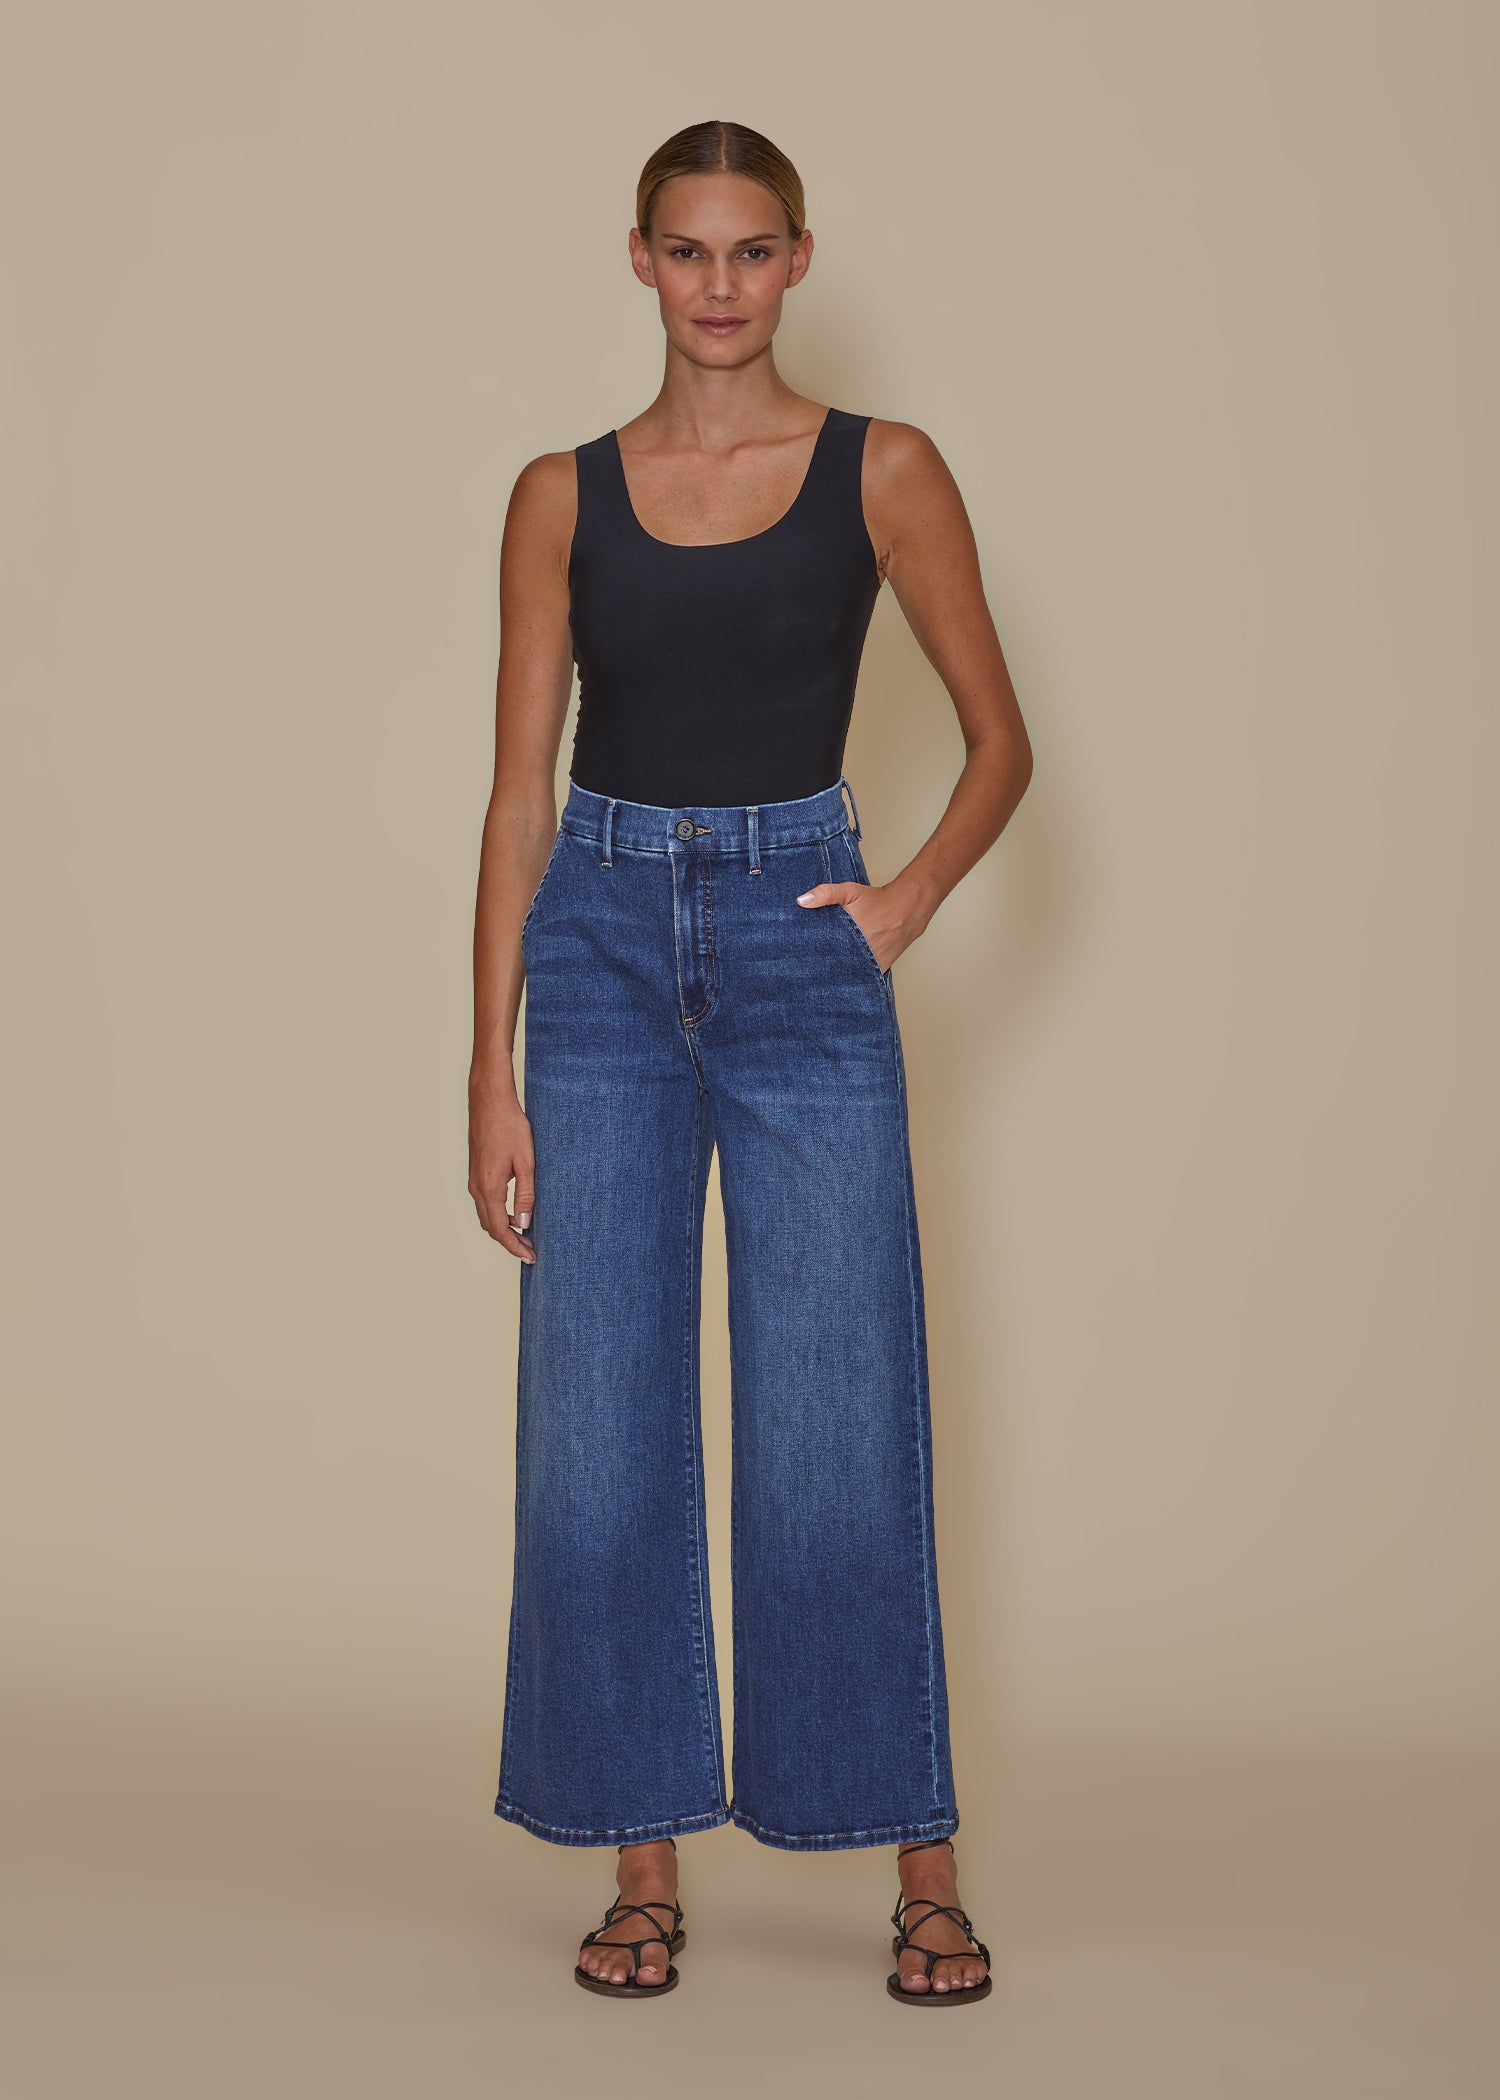 LE JEAN Jude Trouser Ankle in Libertine